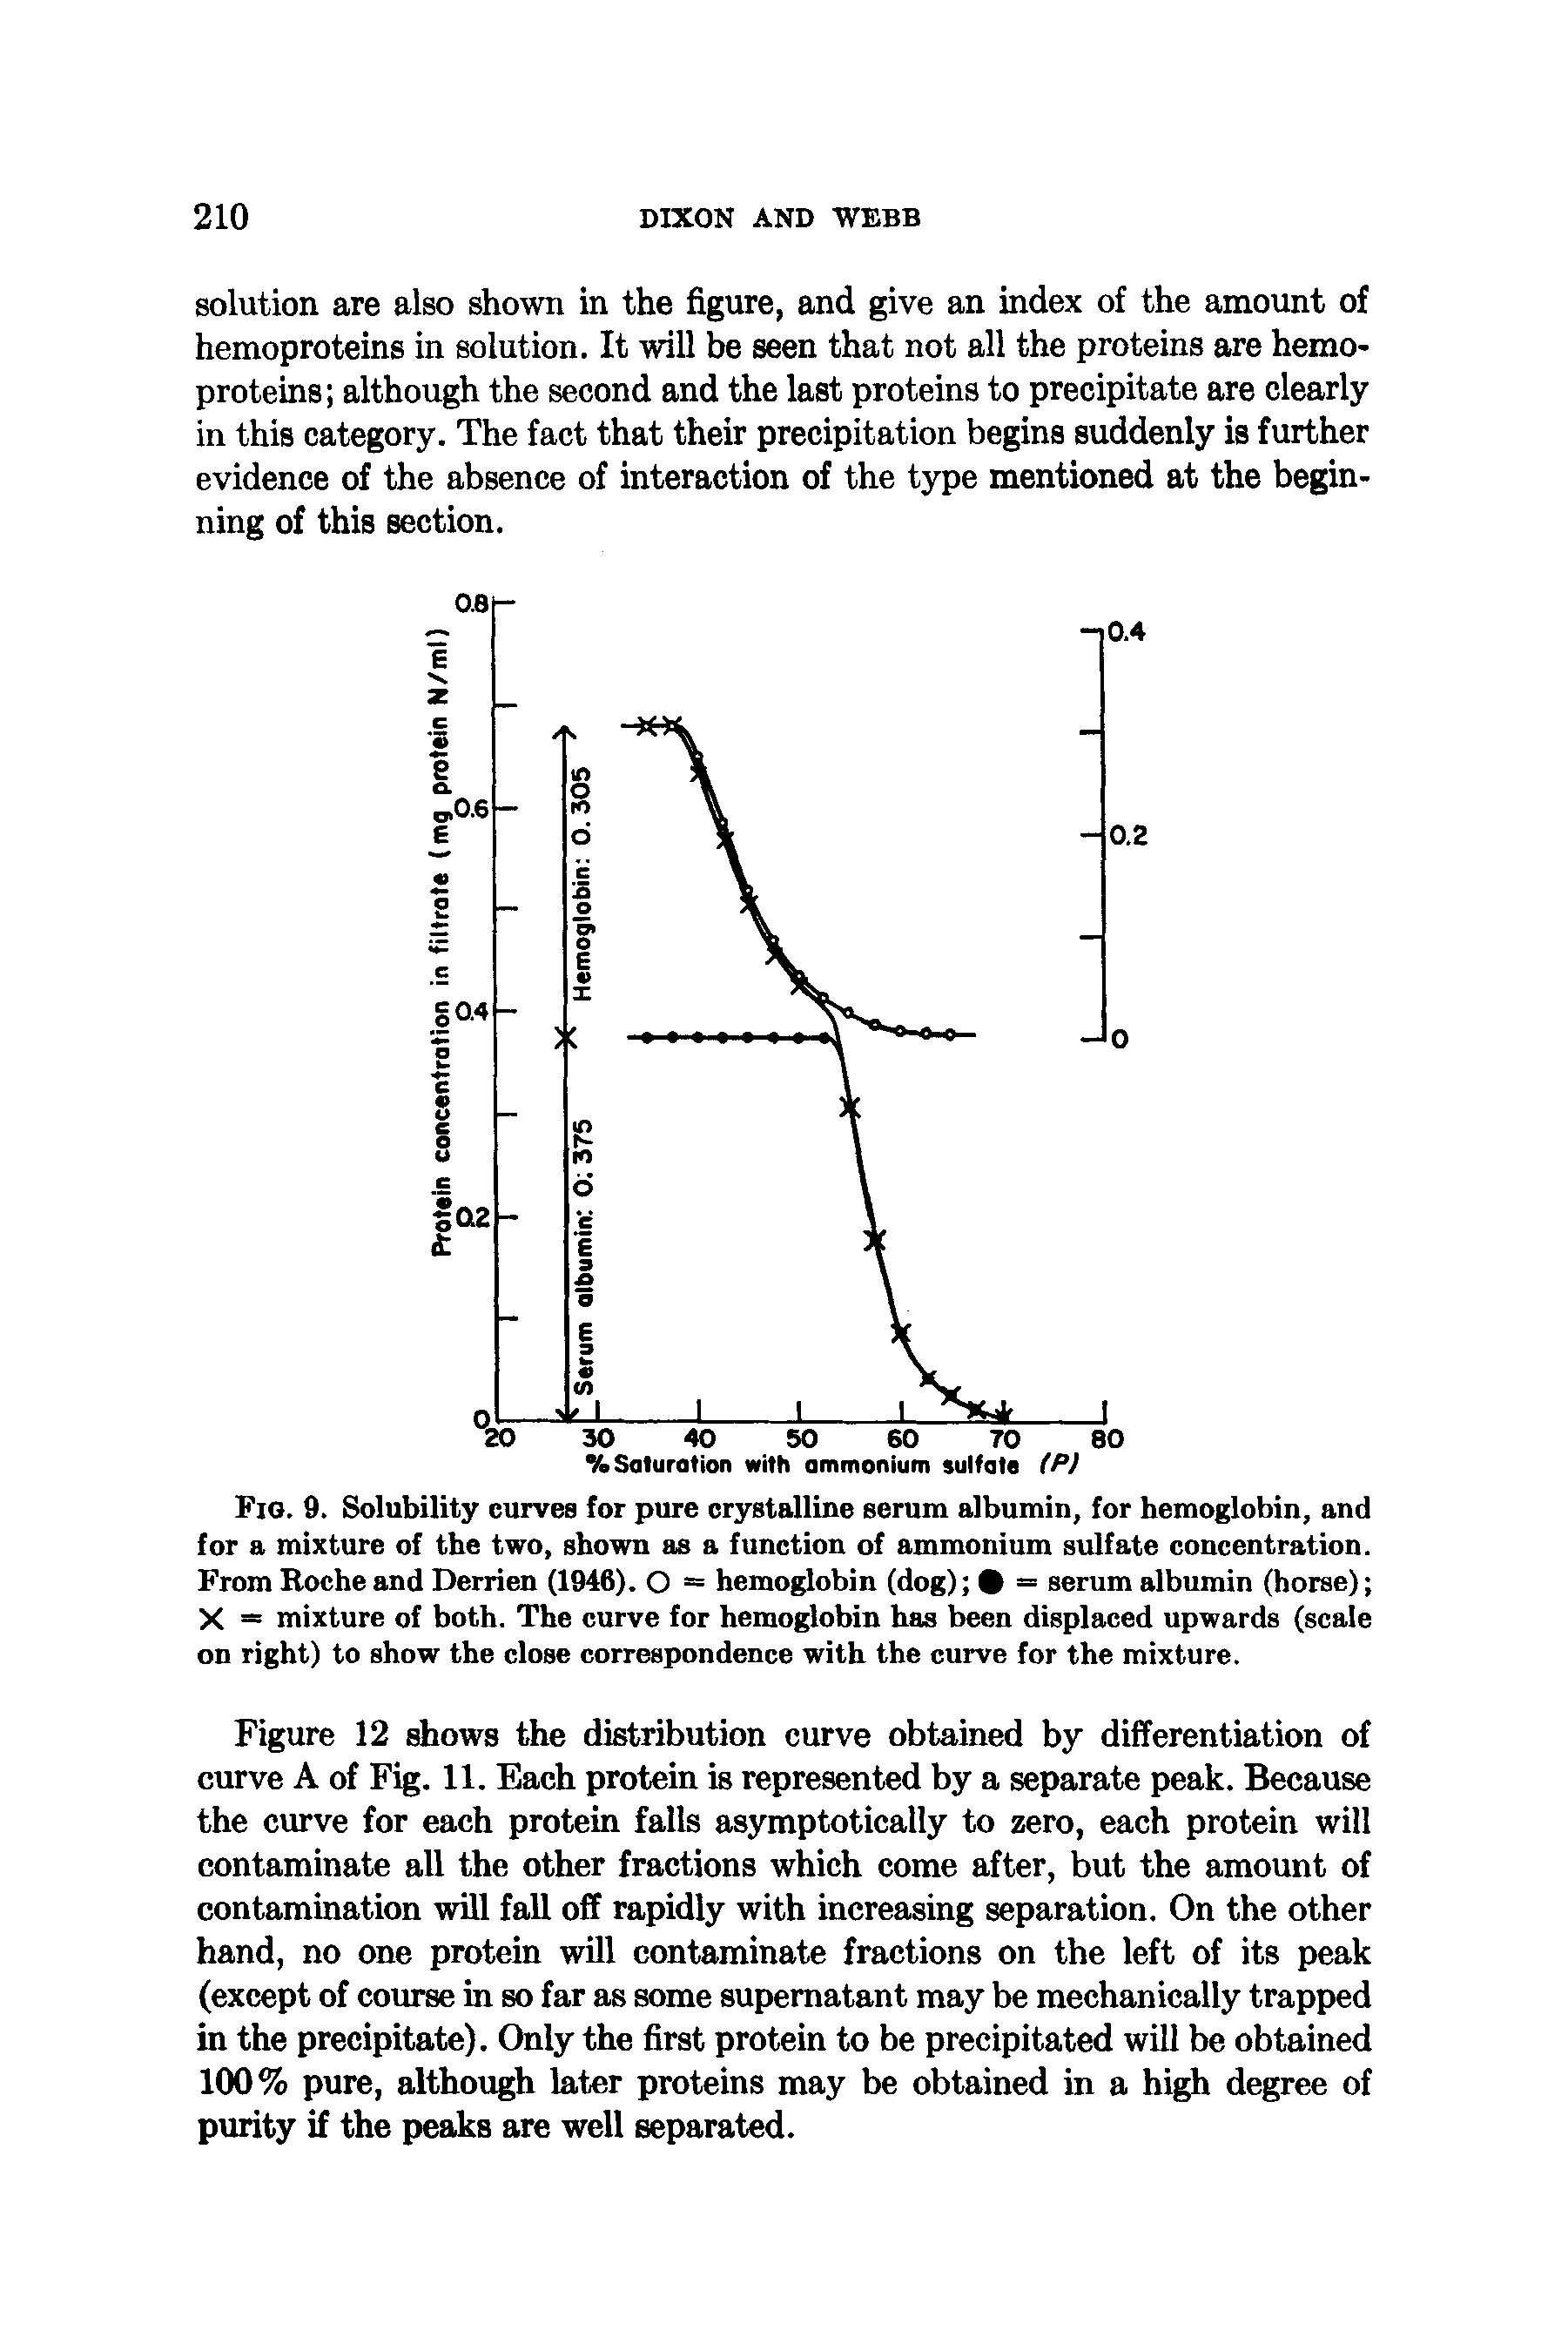 Fig. 9. Solubility curves for pure crystalline serum albumin, for hemoglobin, and for a mixture of the two, shown as a function of ammonium sulfate concentration. From Roche and Derrien (1946). O = hemoglobin (dog) 9 = serum albumin (horse) X = mixture of both. The curve for hemoglobin has been displaced upwards (scale on right) to show the close correspondence with the curve for the mixture.